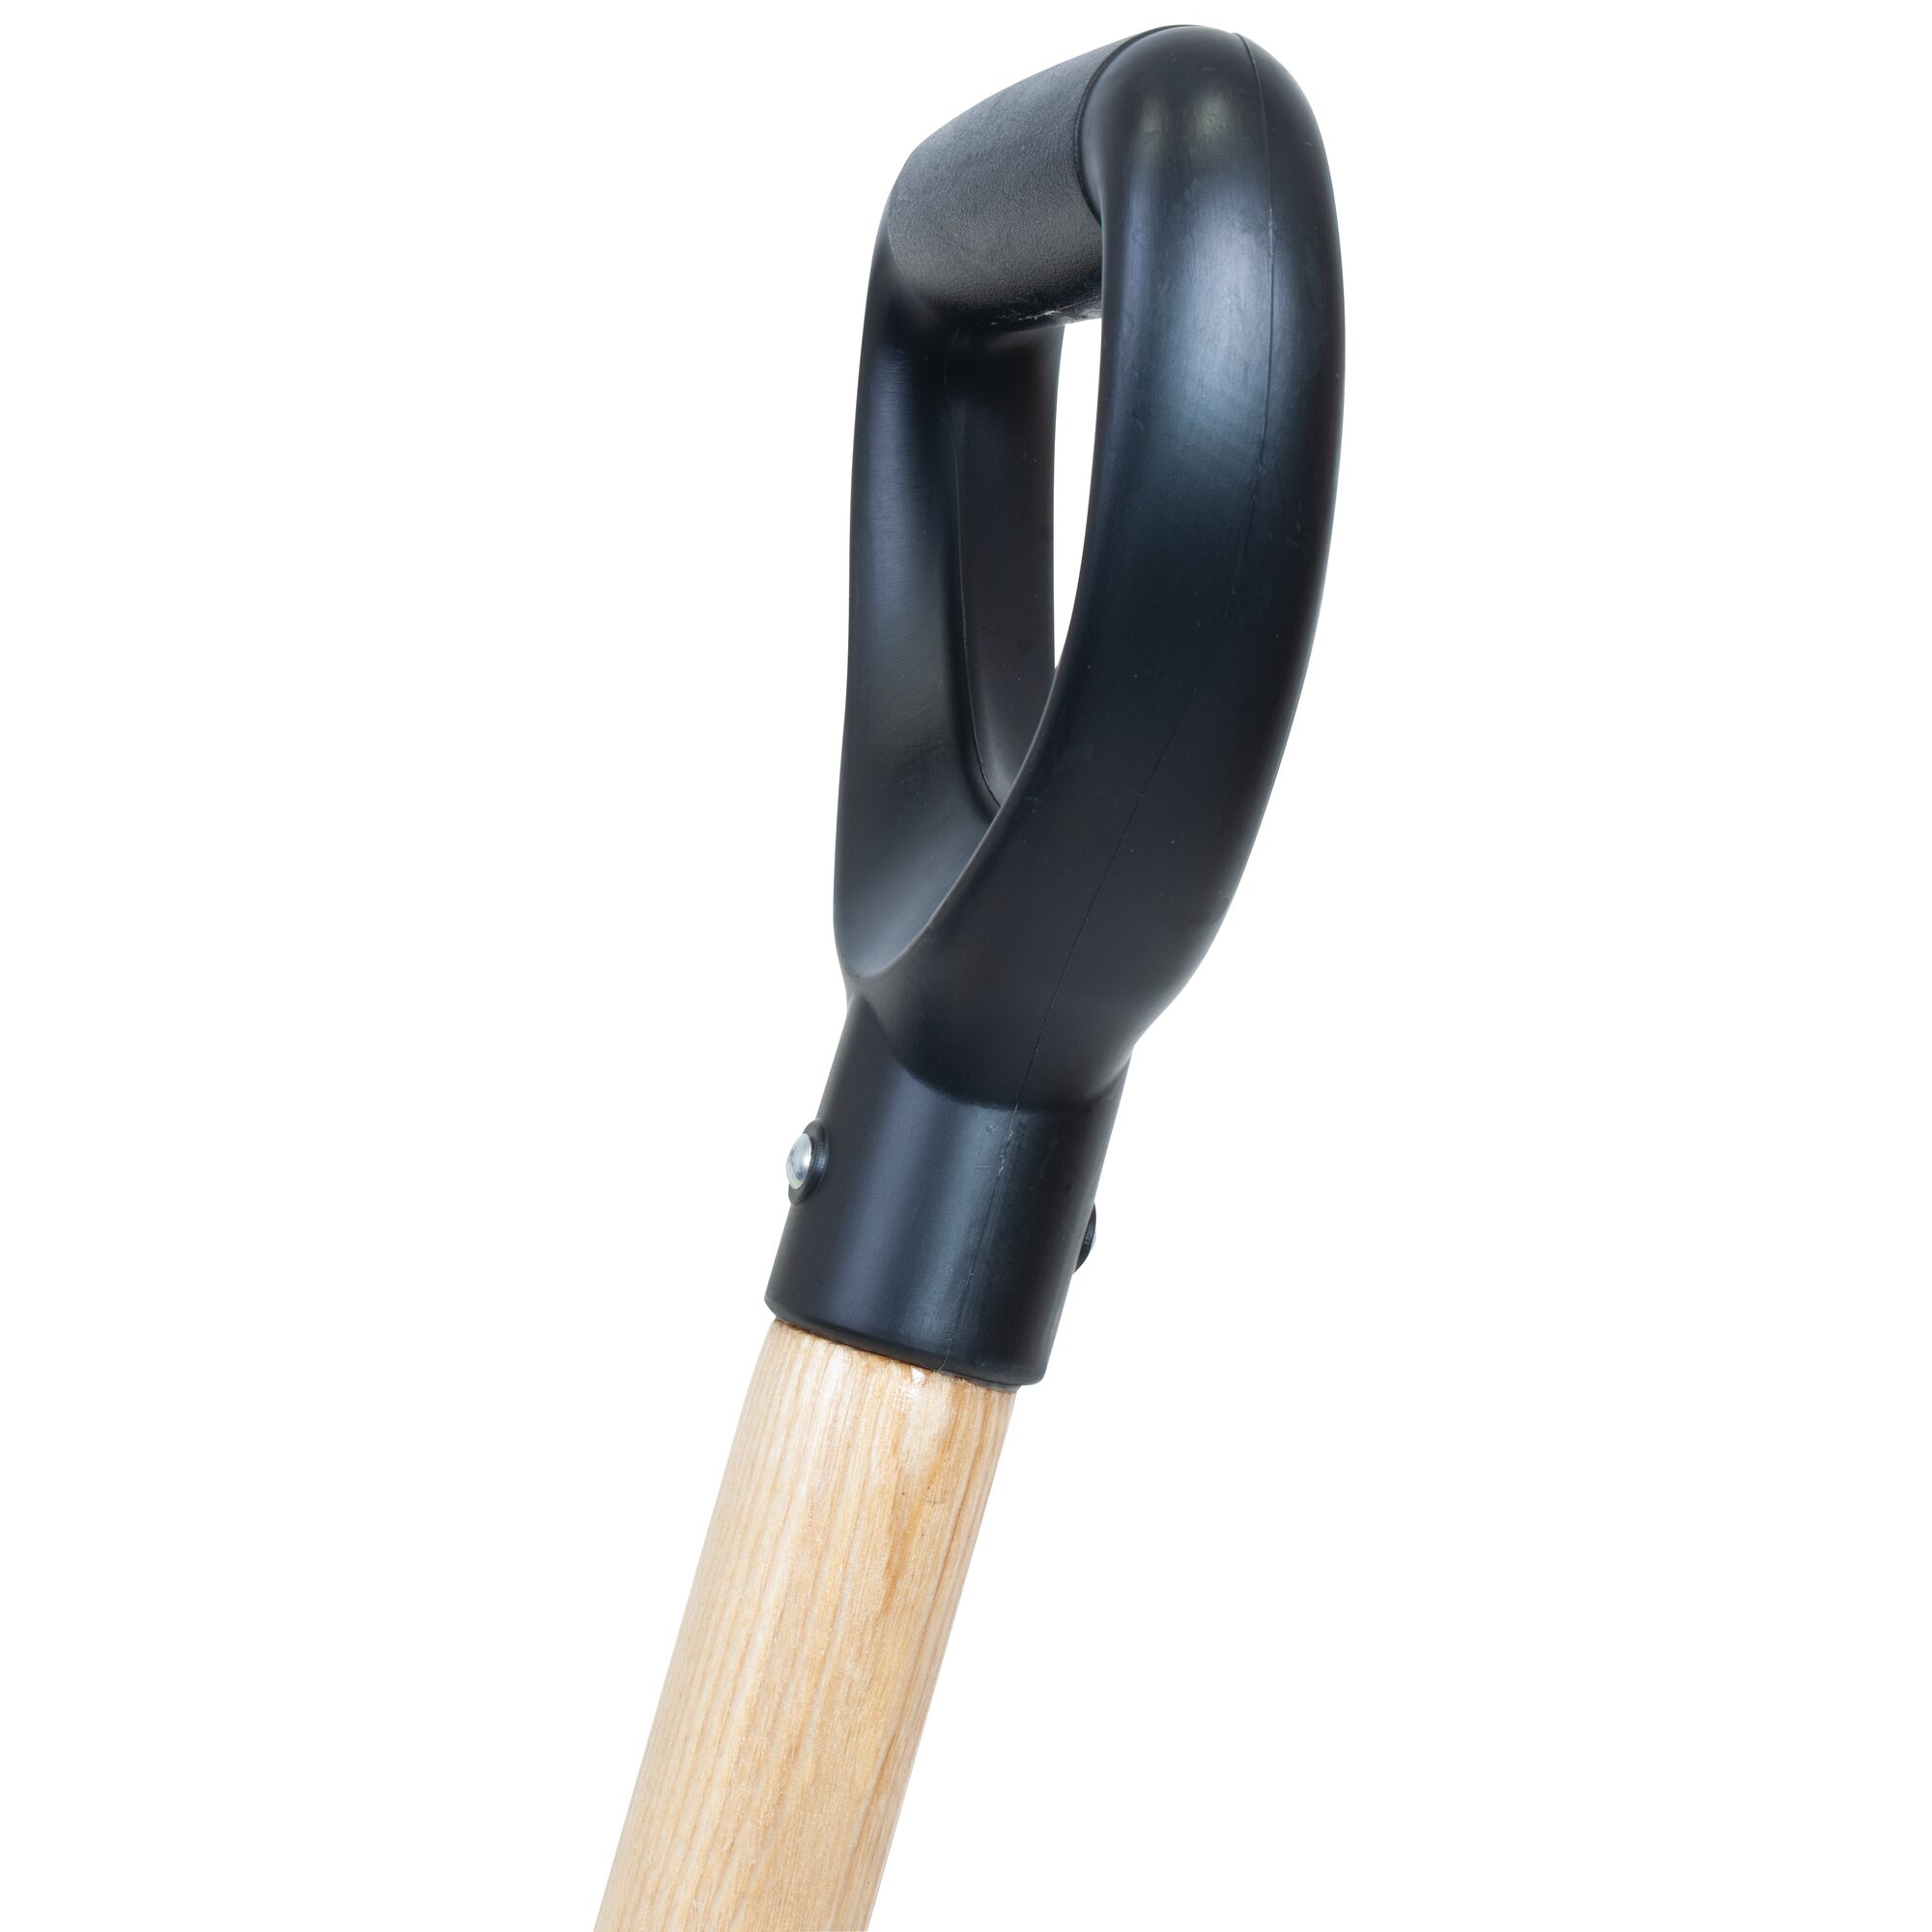 Comfortable handle grip feature of a wood handle border spade.